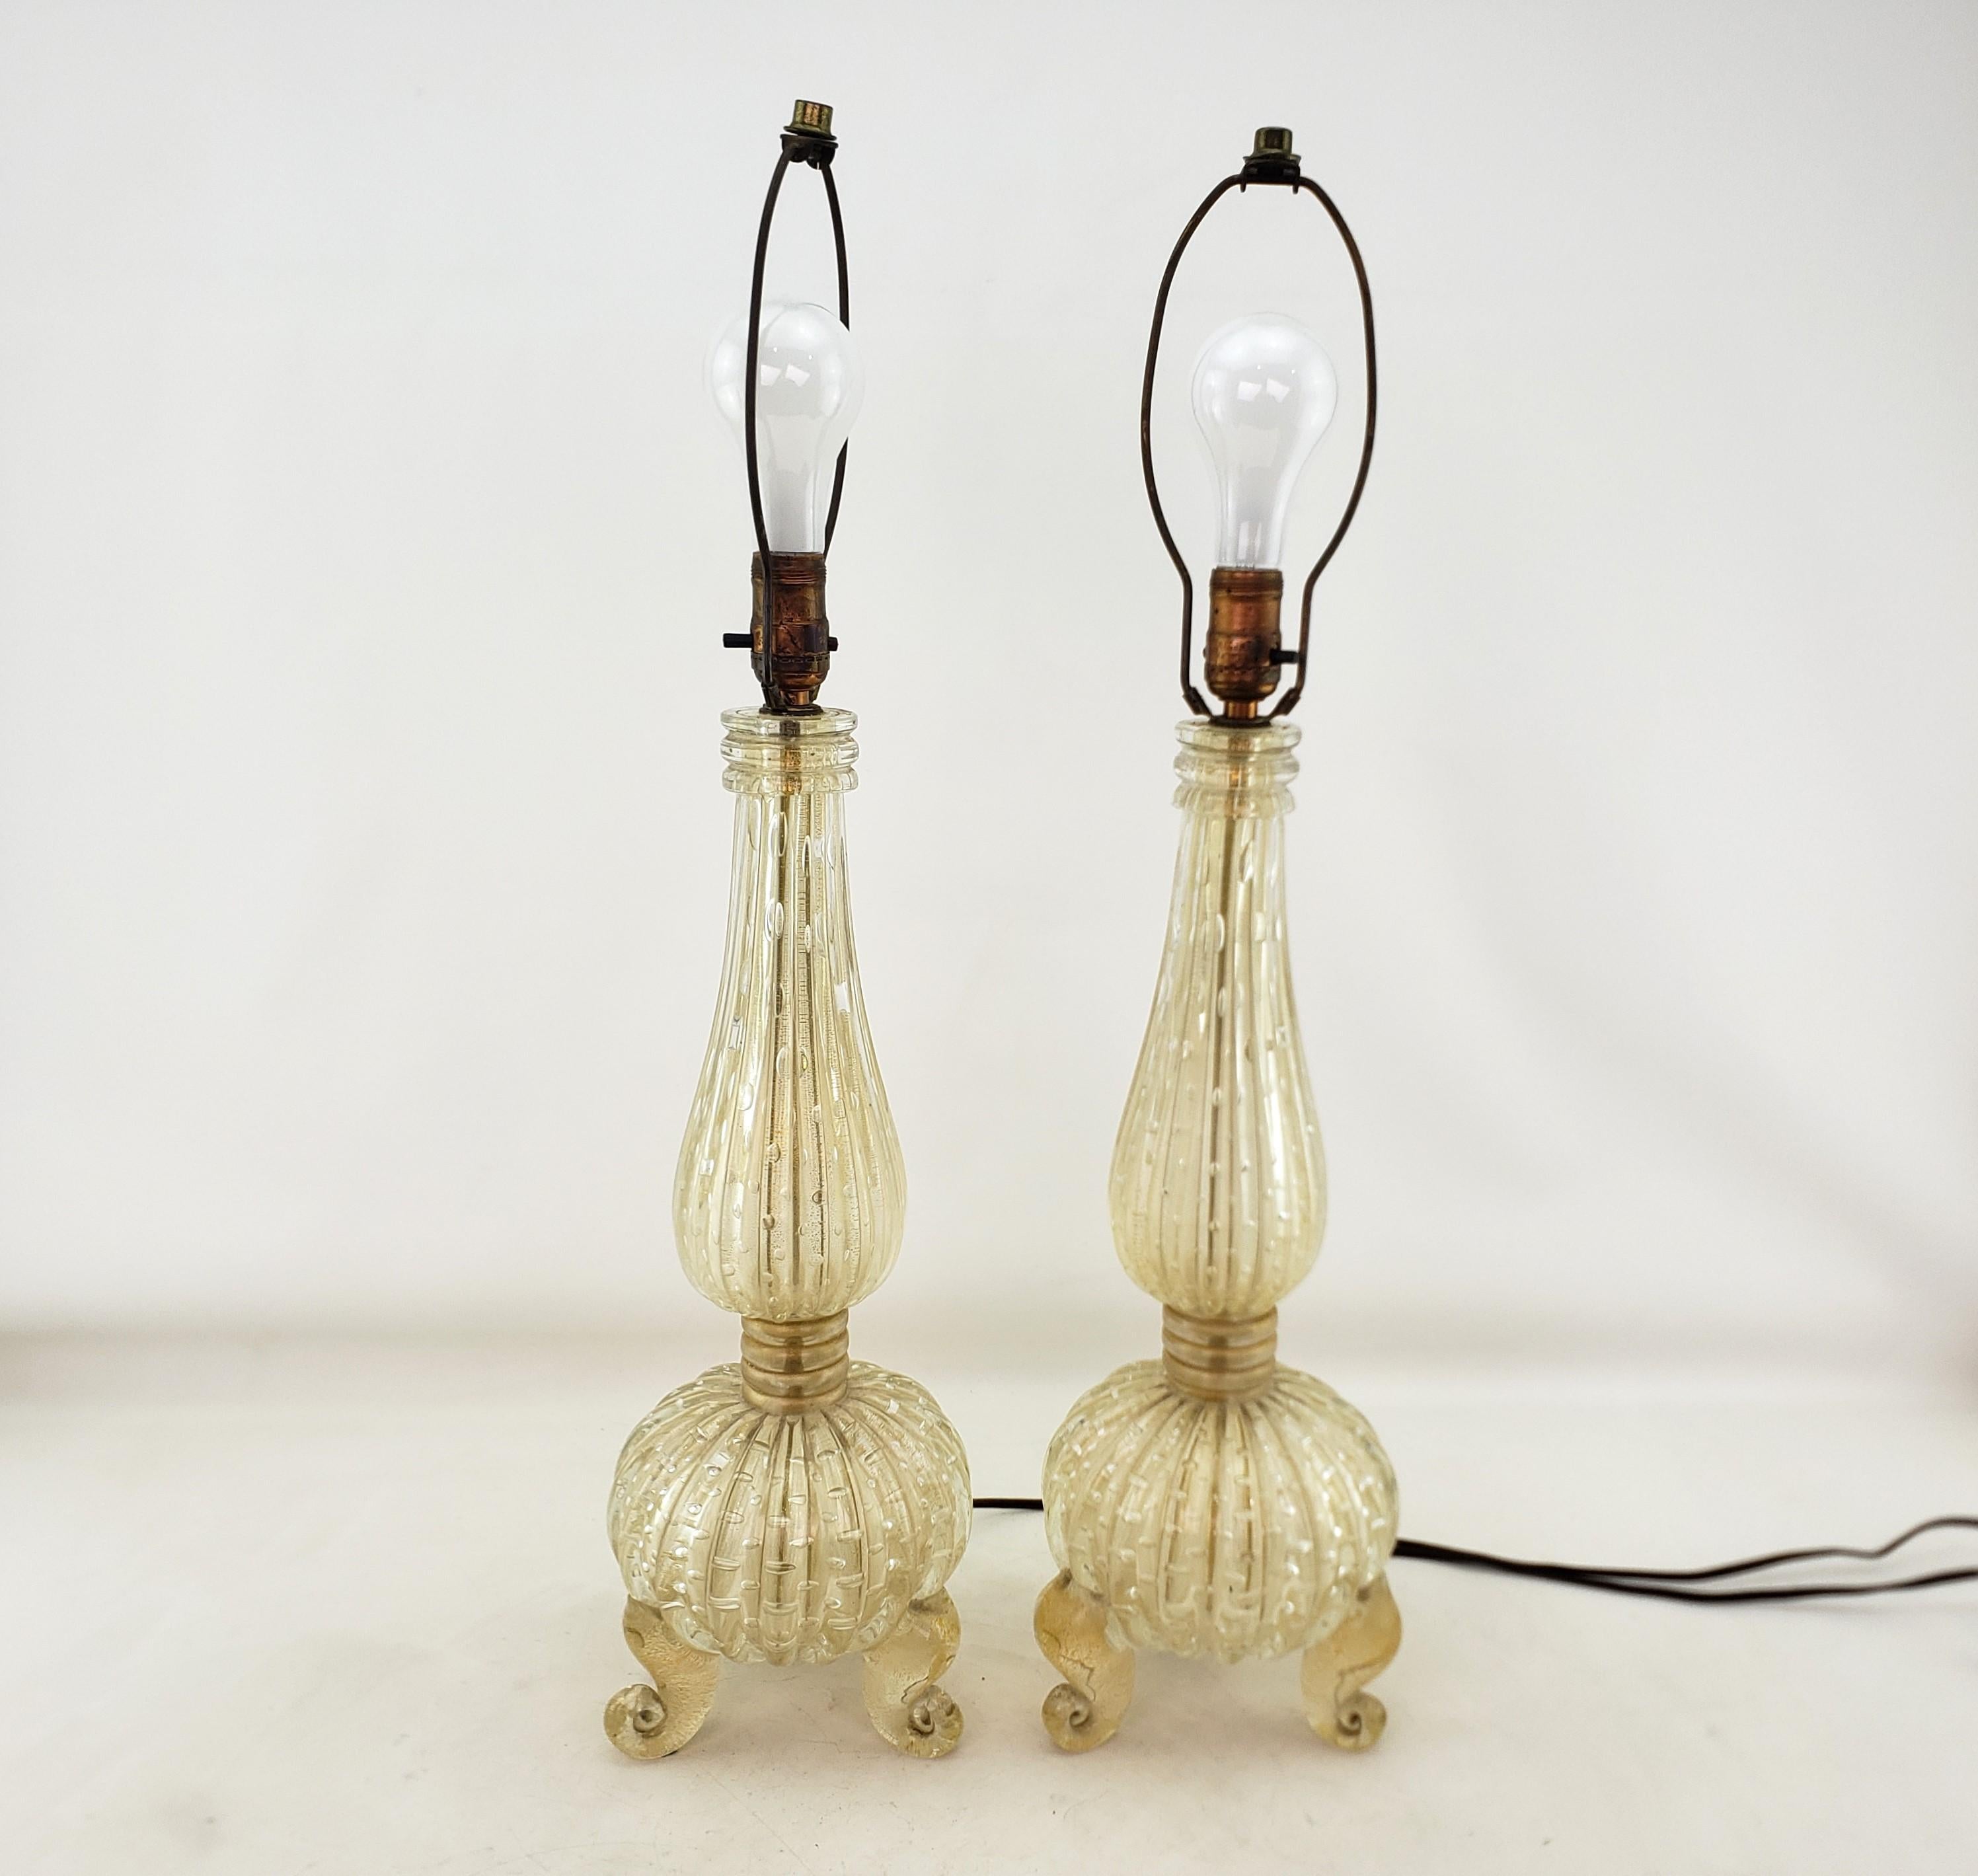 This pair of table lamps are unsigned, but being attributed to Barovier of Murano Italy and date to approximately 1950 and done in the Mid-Century Modern style. The lamps are composed of a heavy clear art glass with ribbed stems and bulbous bases